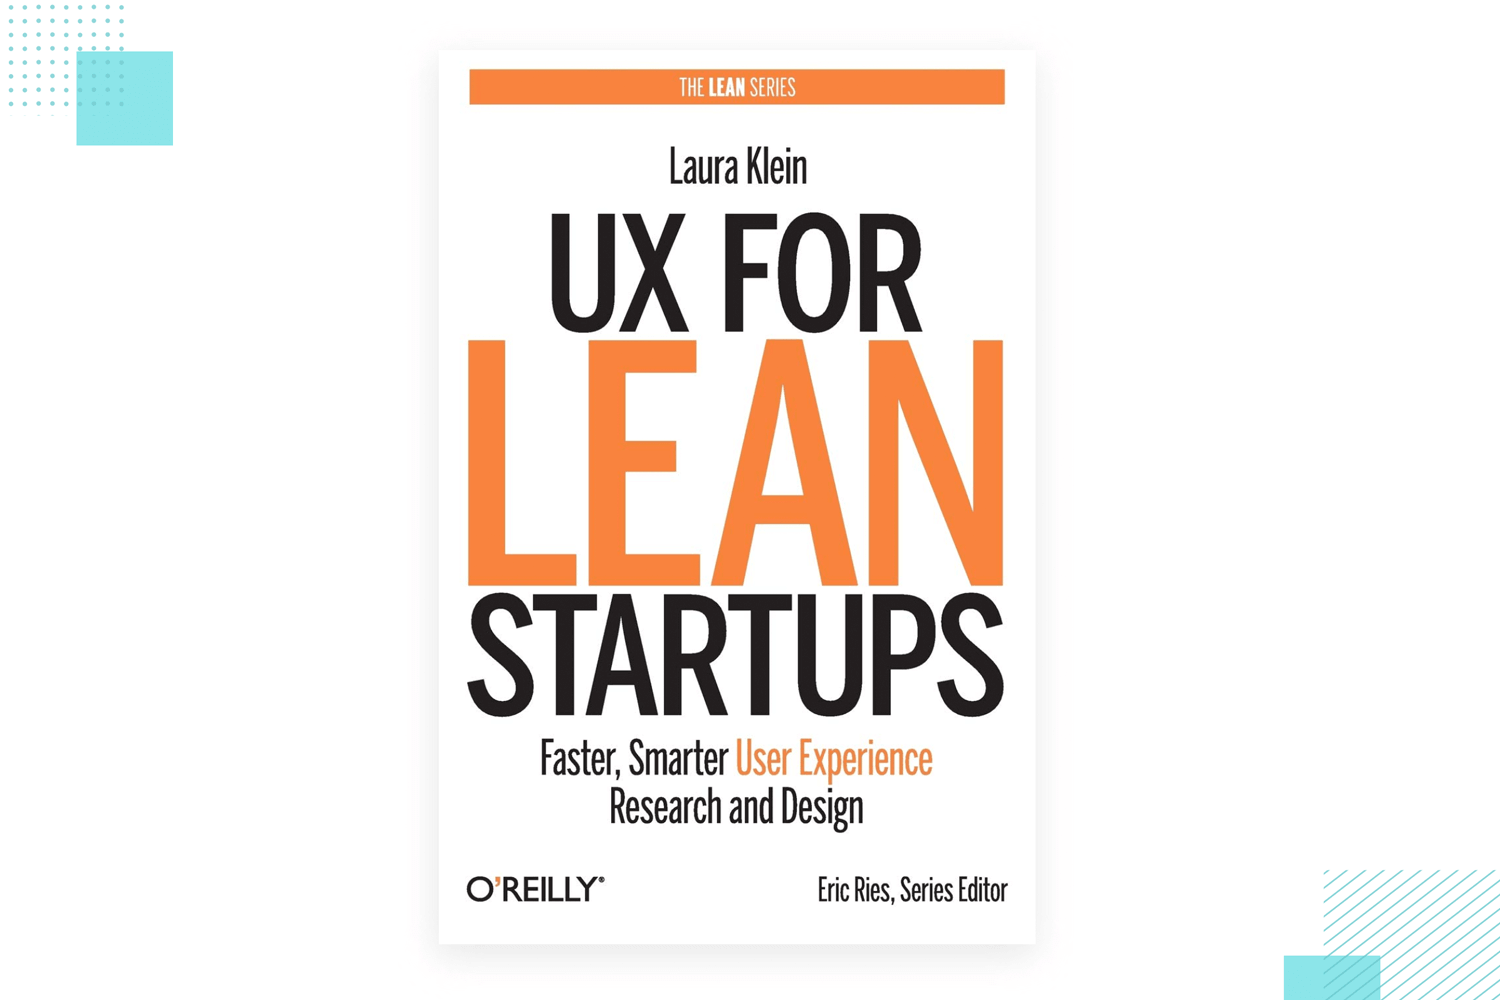 UX for lean startups book